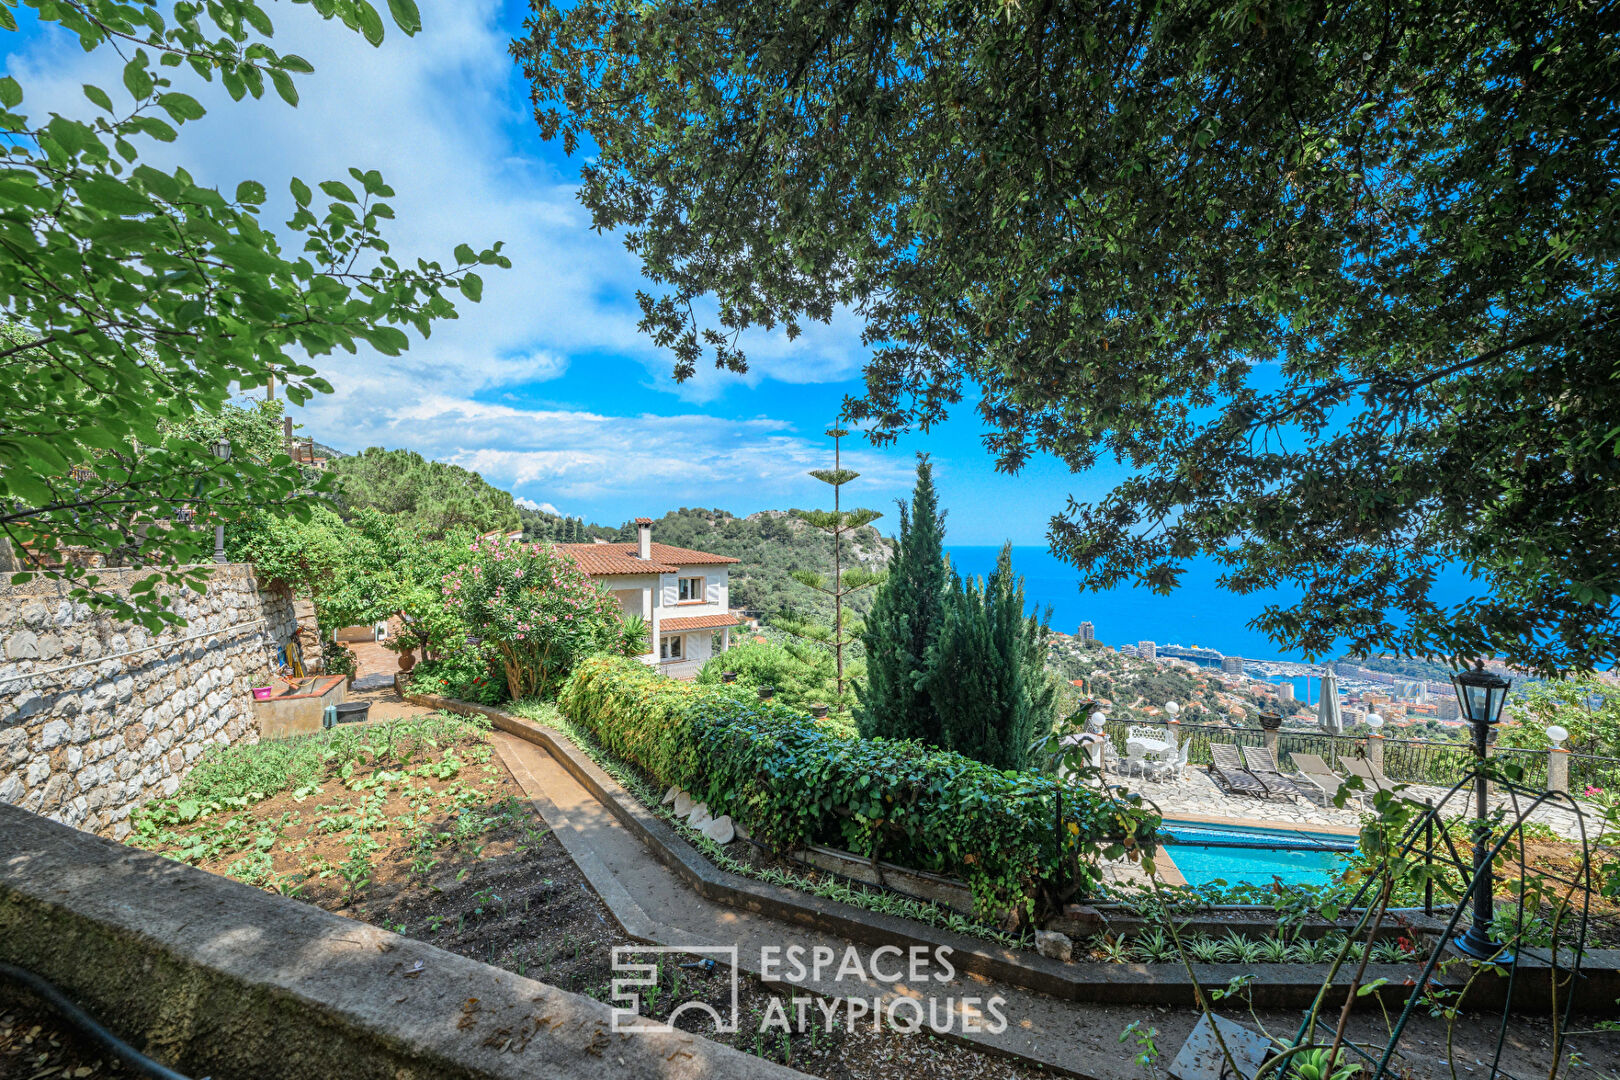 Exceptional estate with sea view over the Principality of Monaco